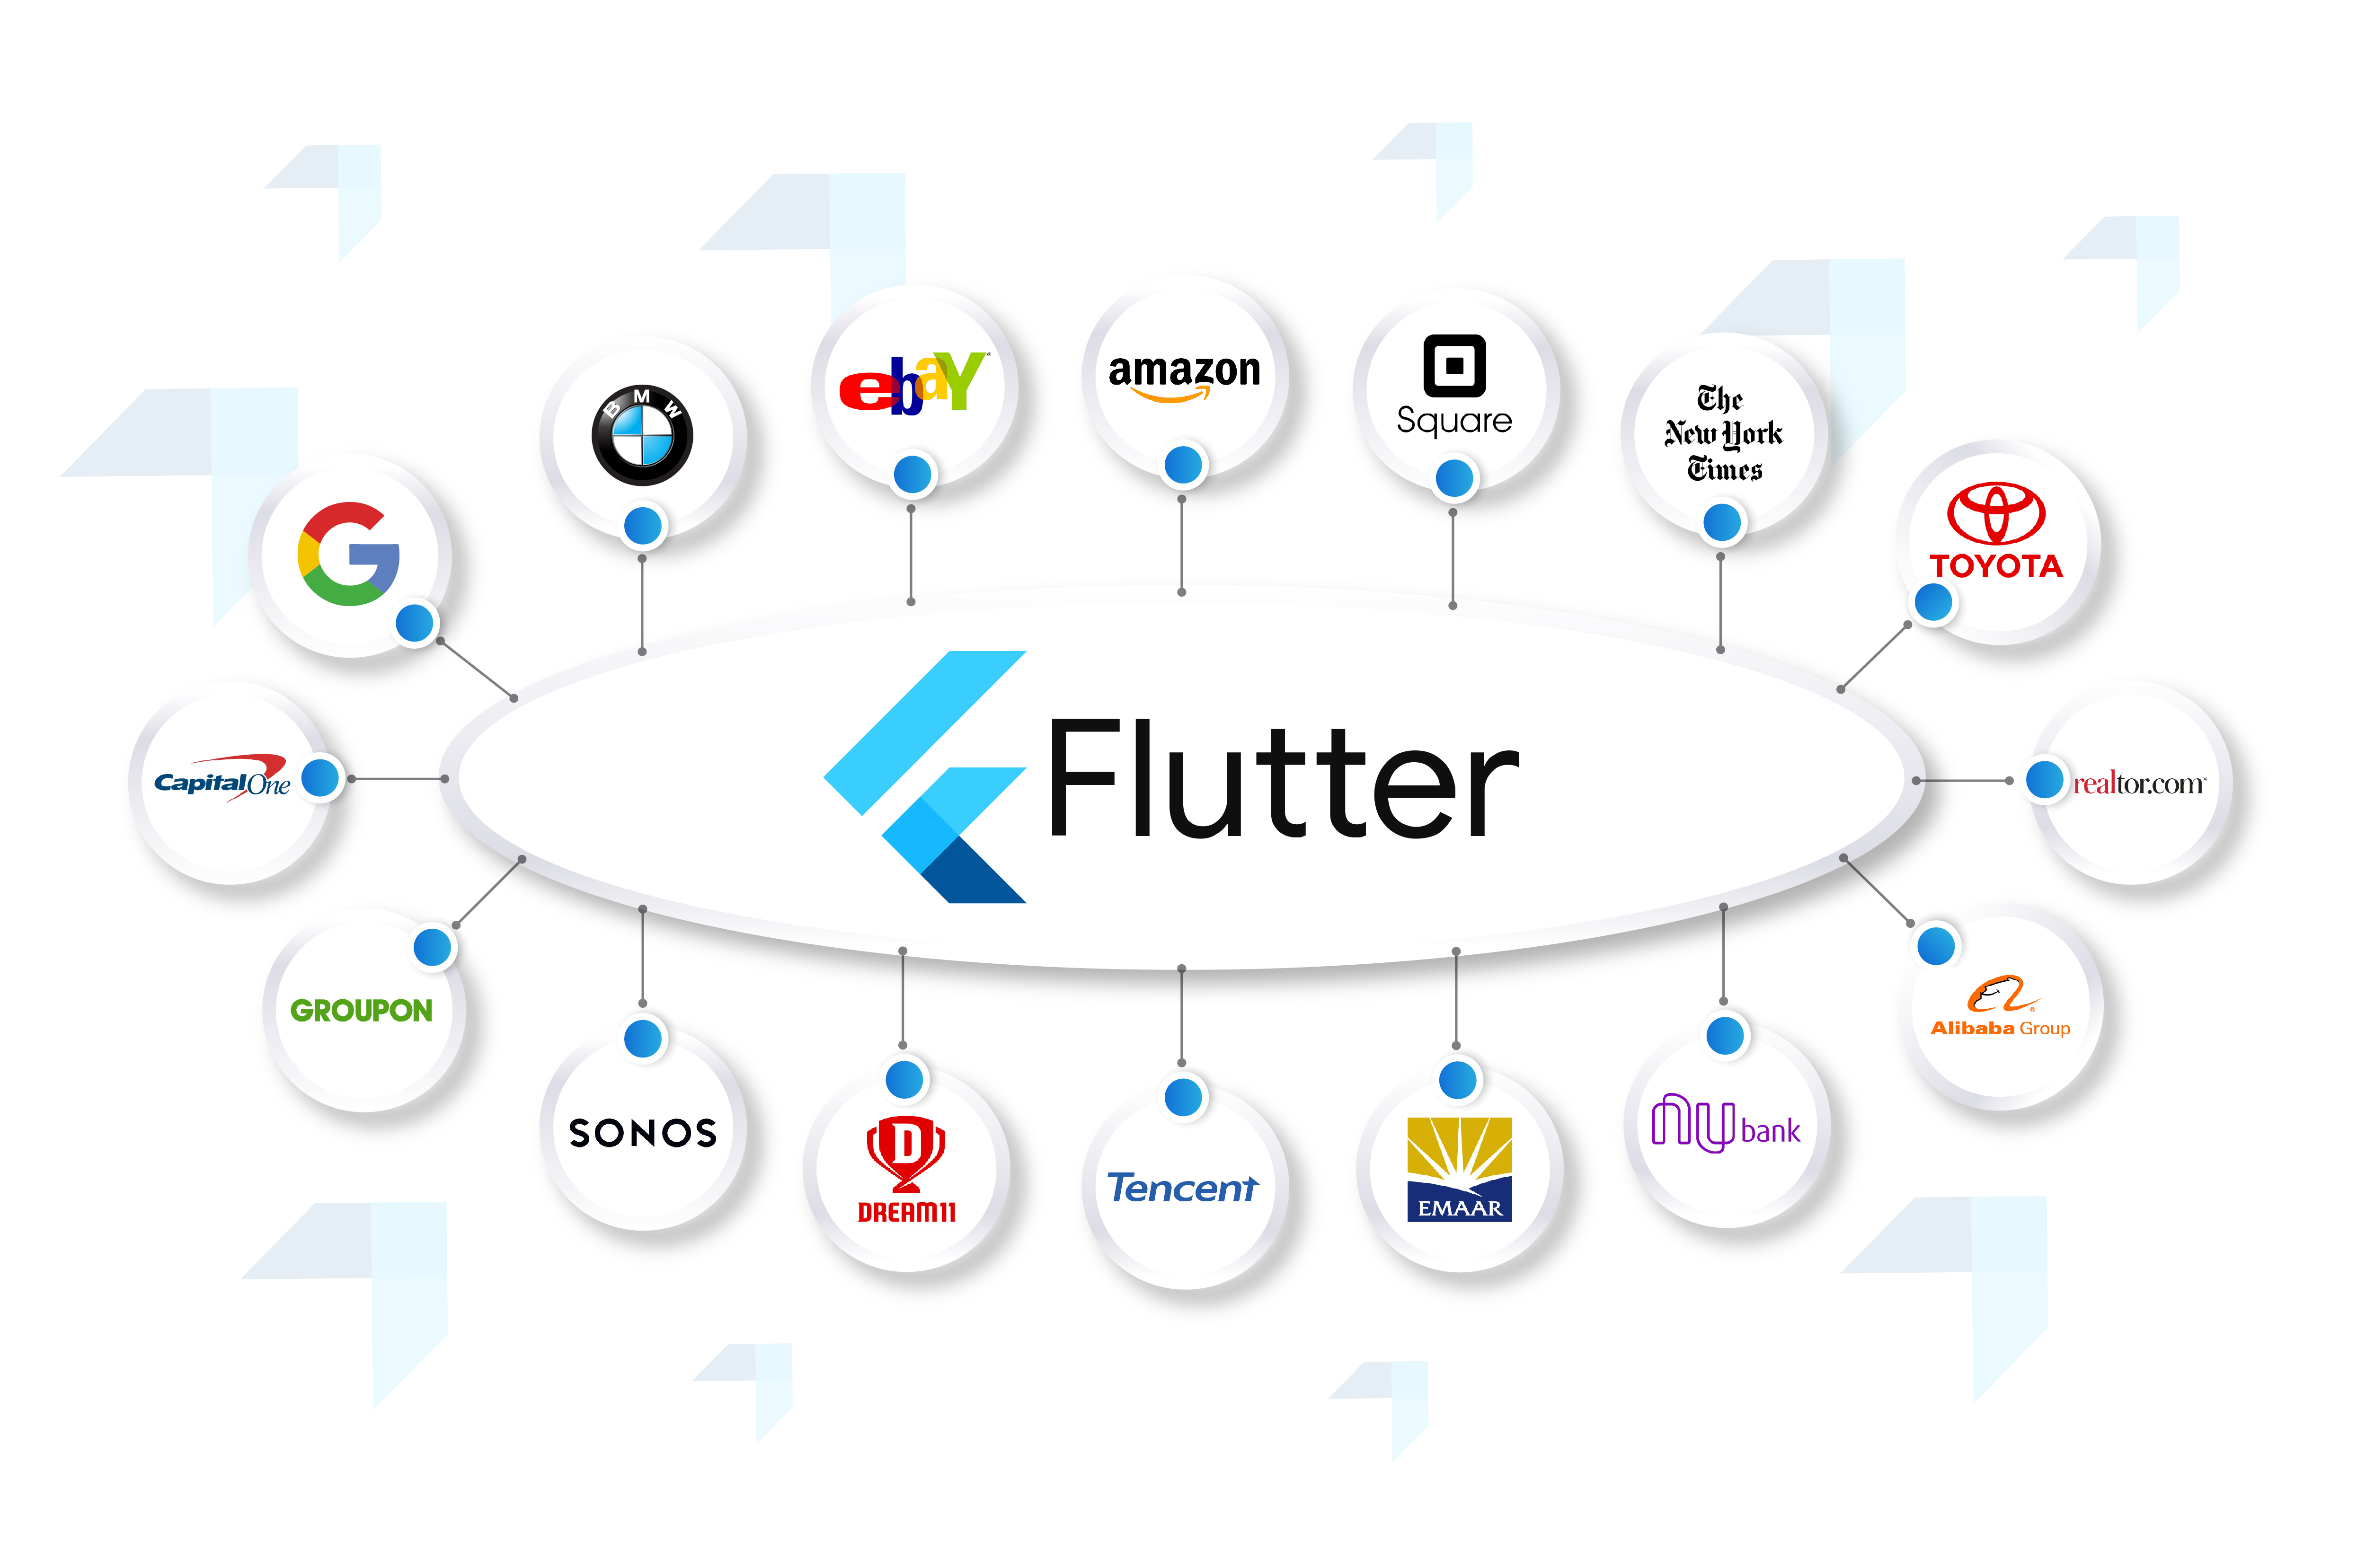 Companies that use Flutter